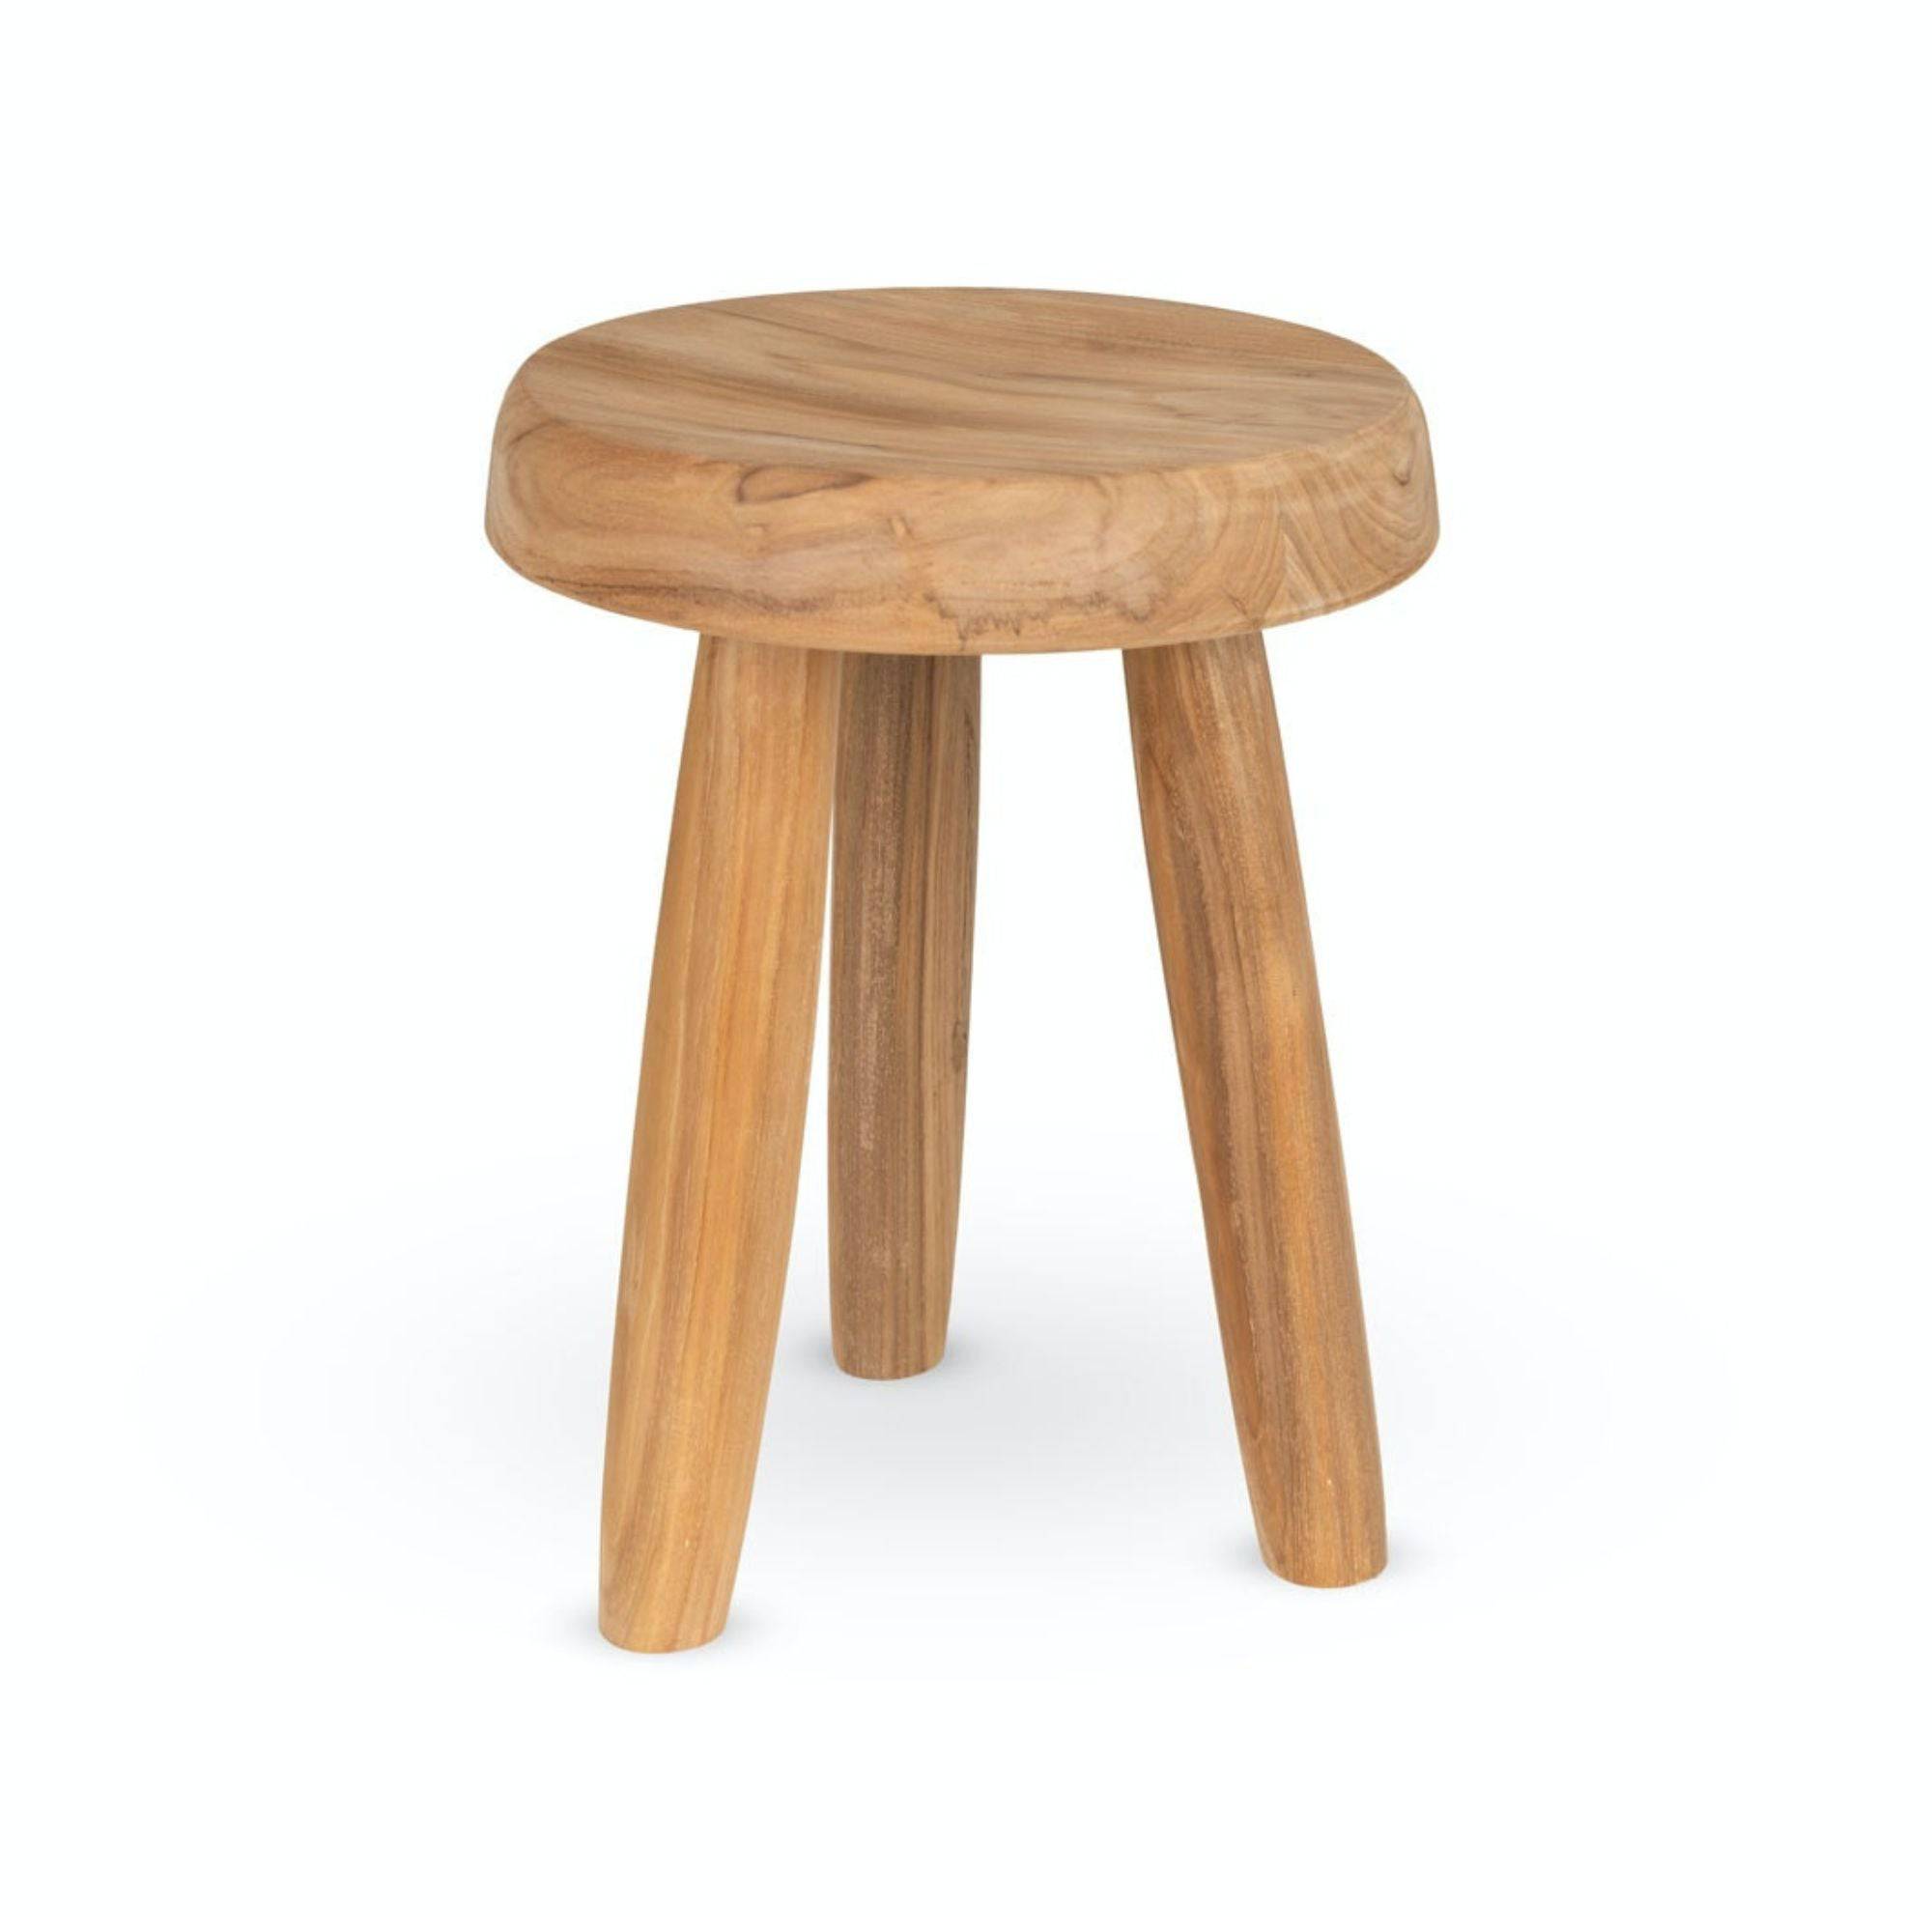 Charles Stool L - THAT COOL LIVING